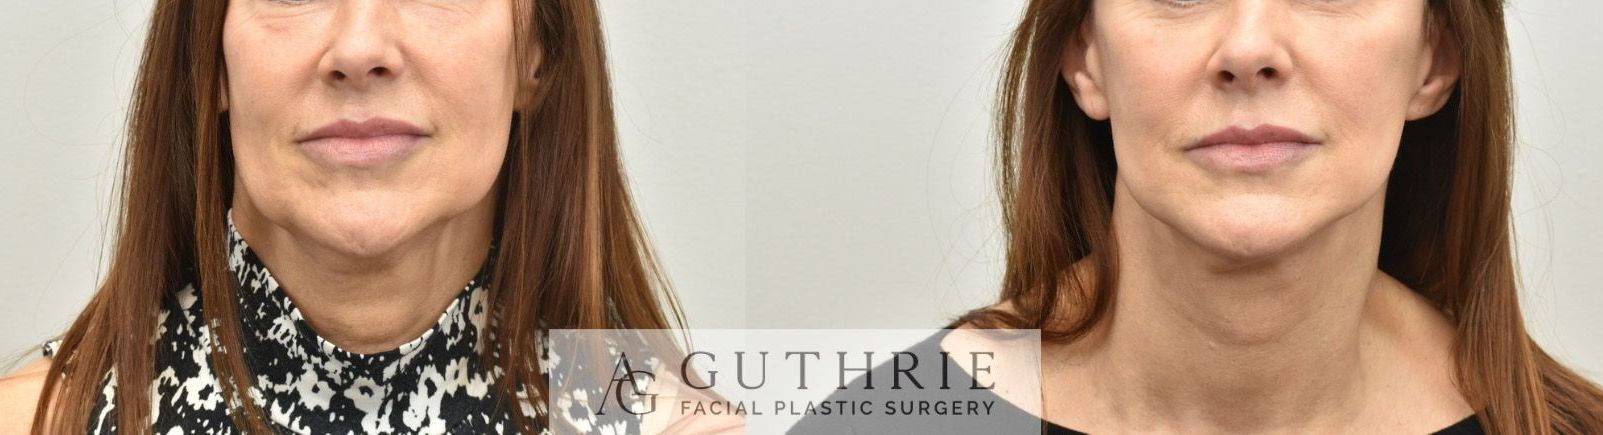 a woman's face before and after facelift